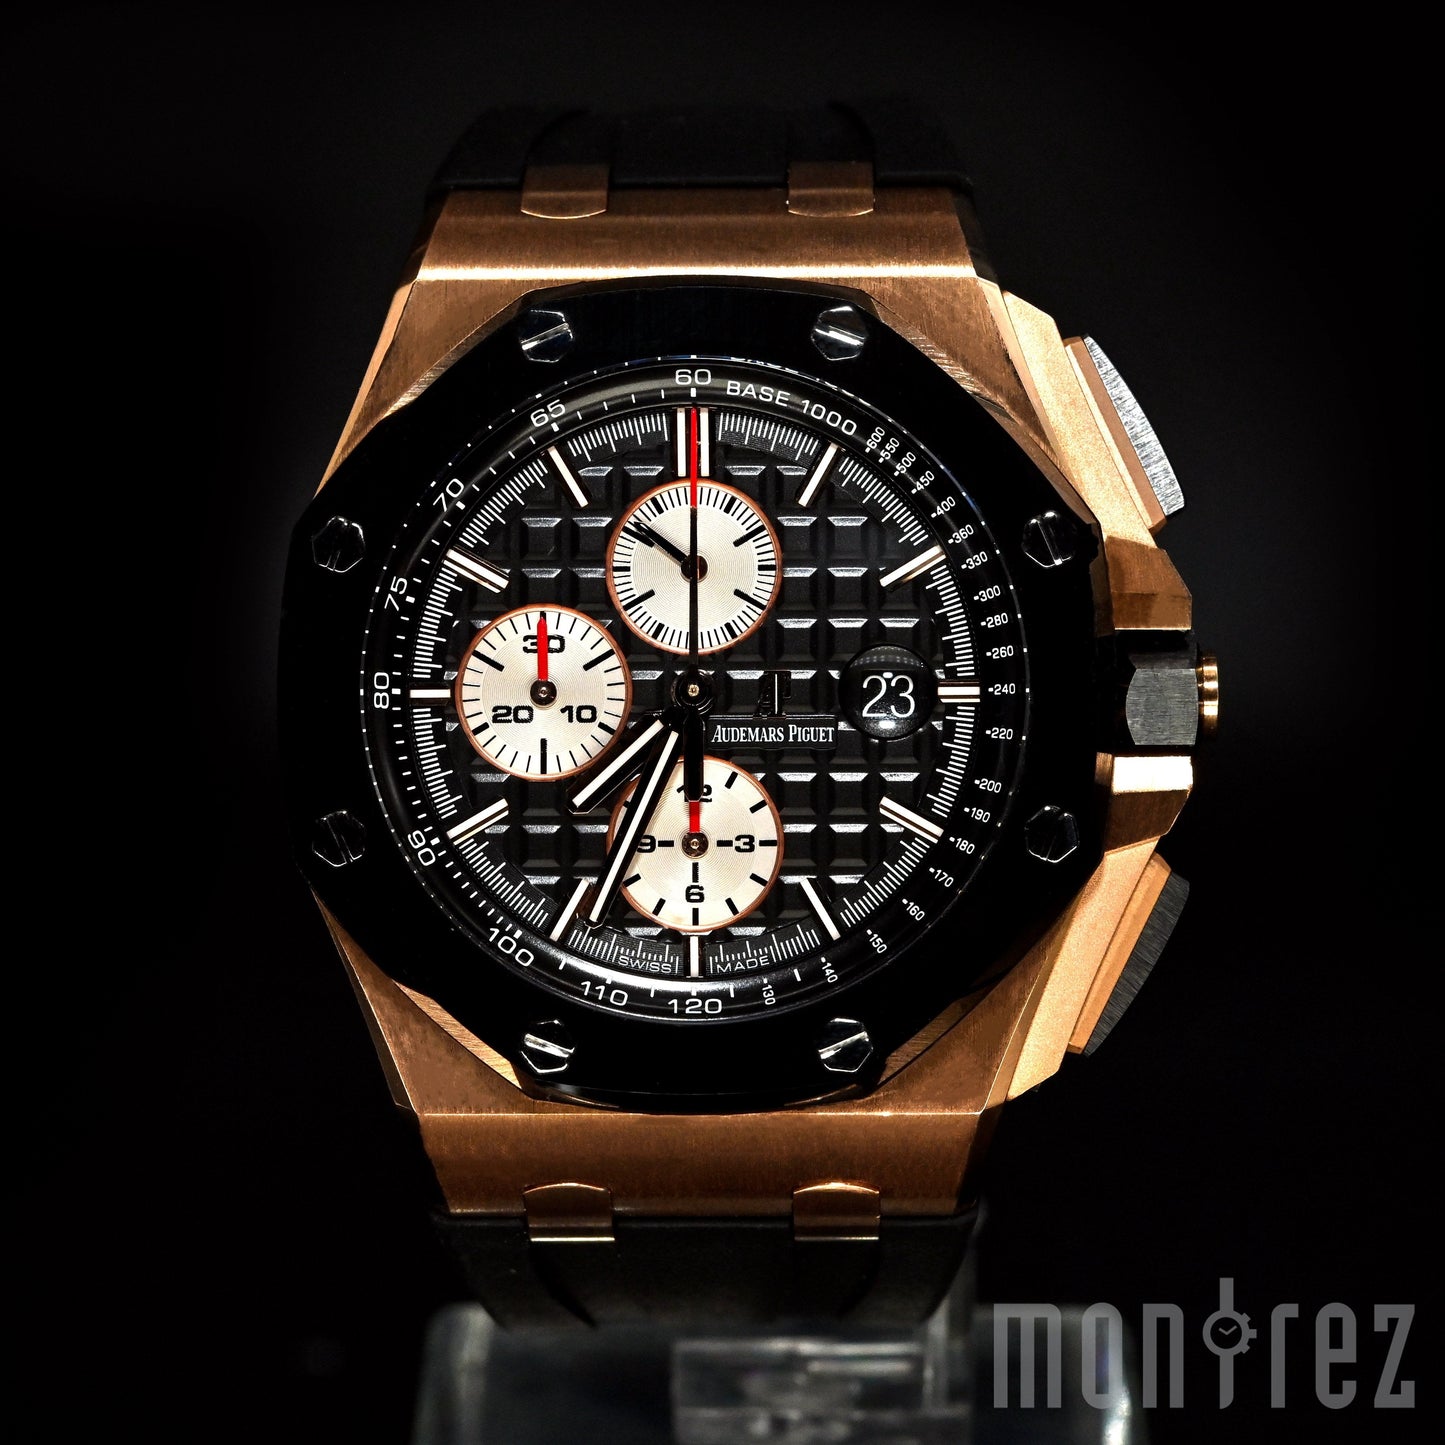 [Pre-Owned Watch] Audemars Piguet Royal Oak Offshore Chronograph 44mm 26401RO.OO.A002CA.01 (Out of Production)